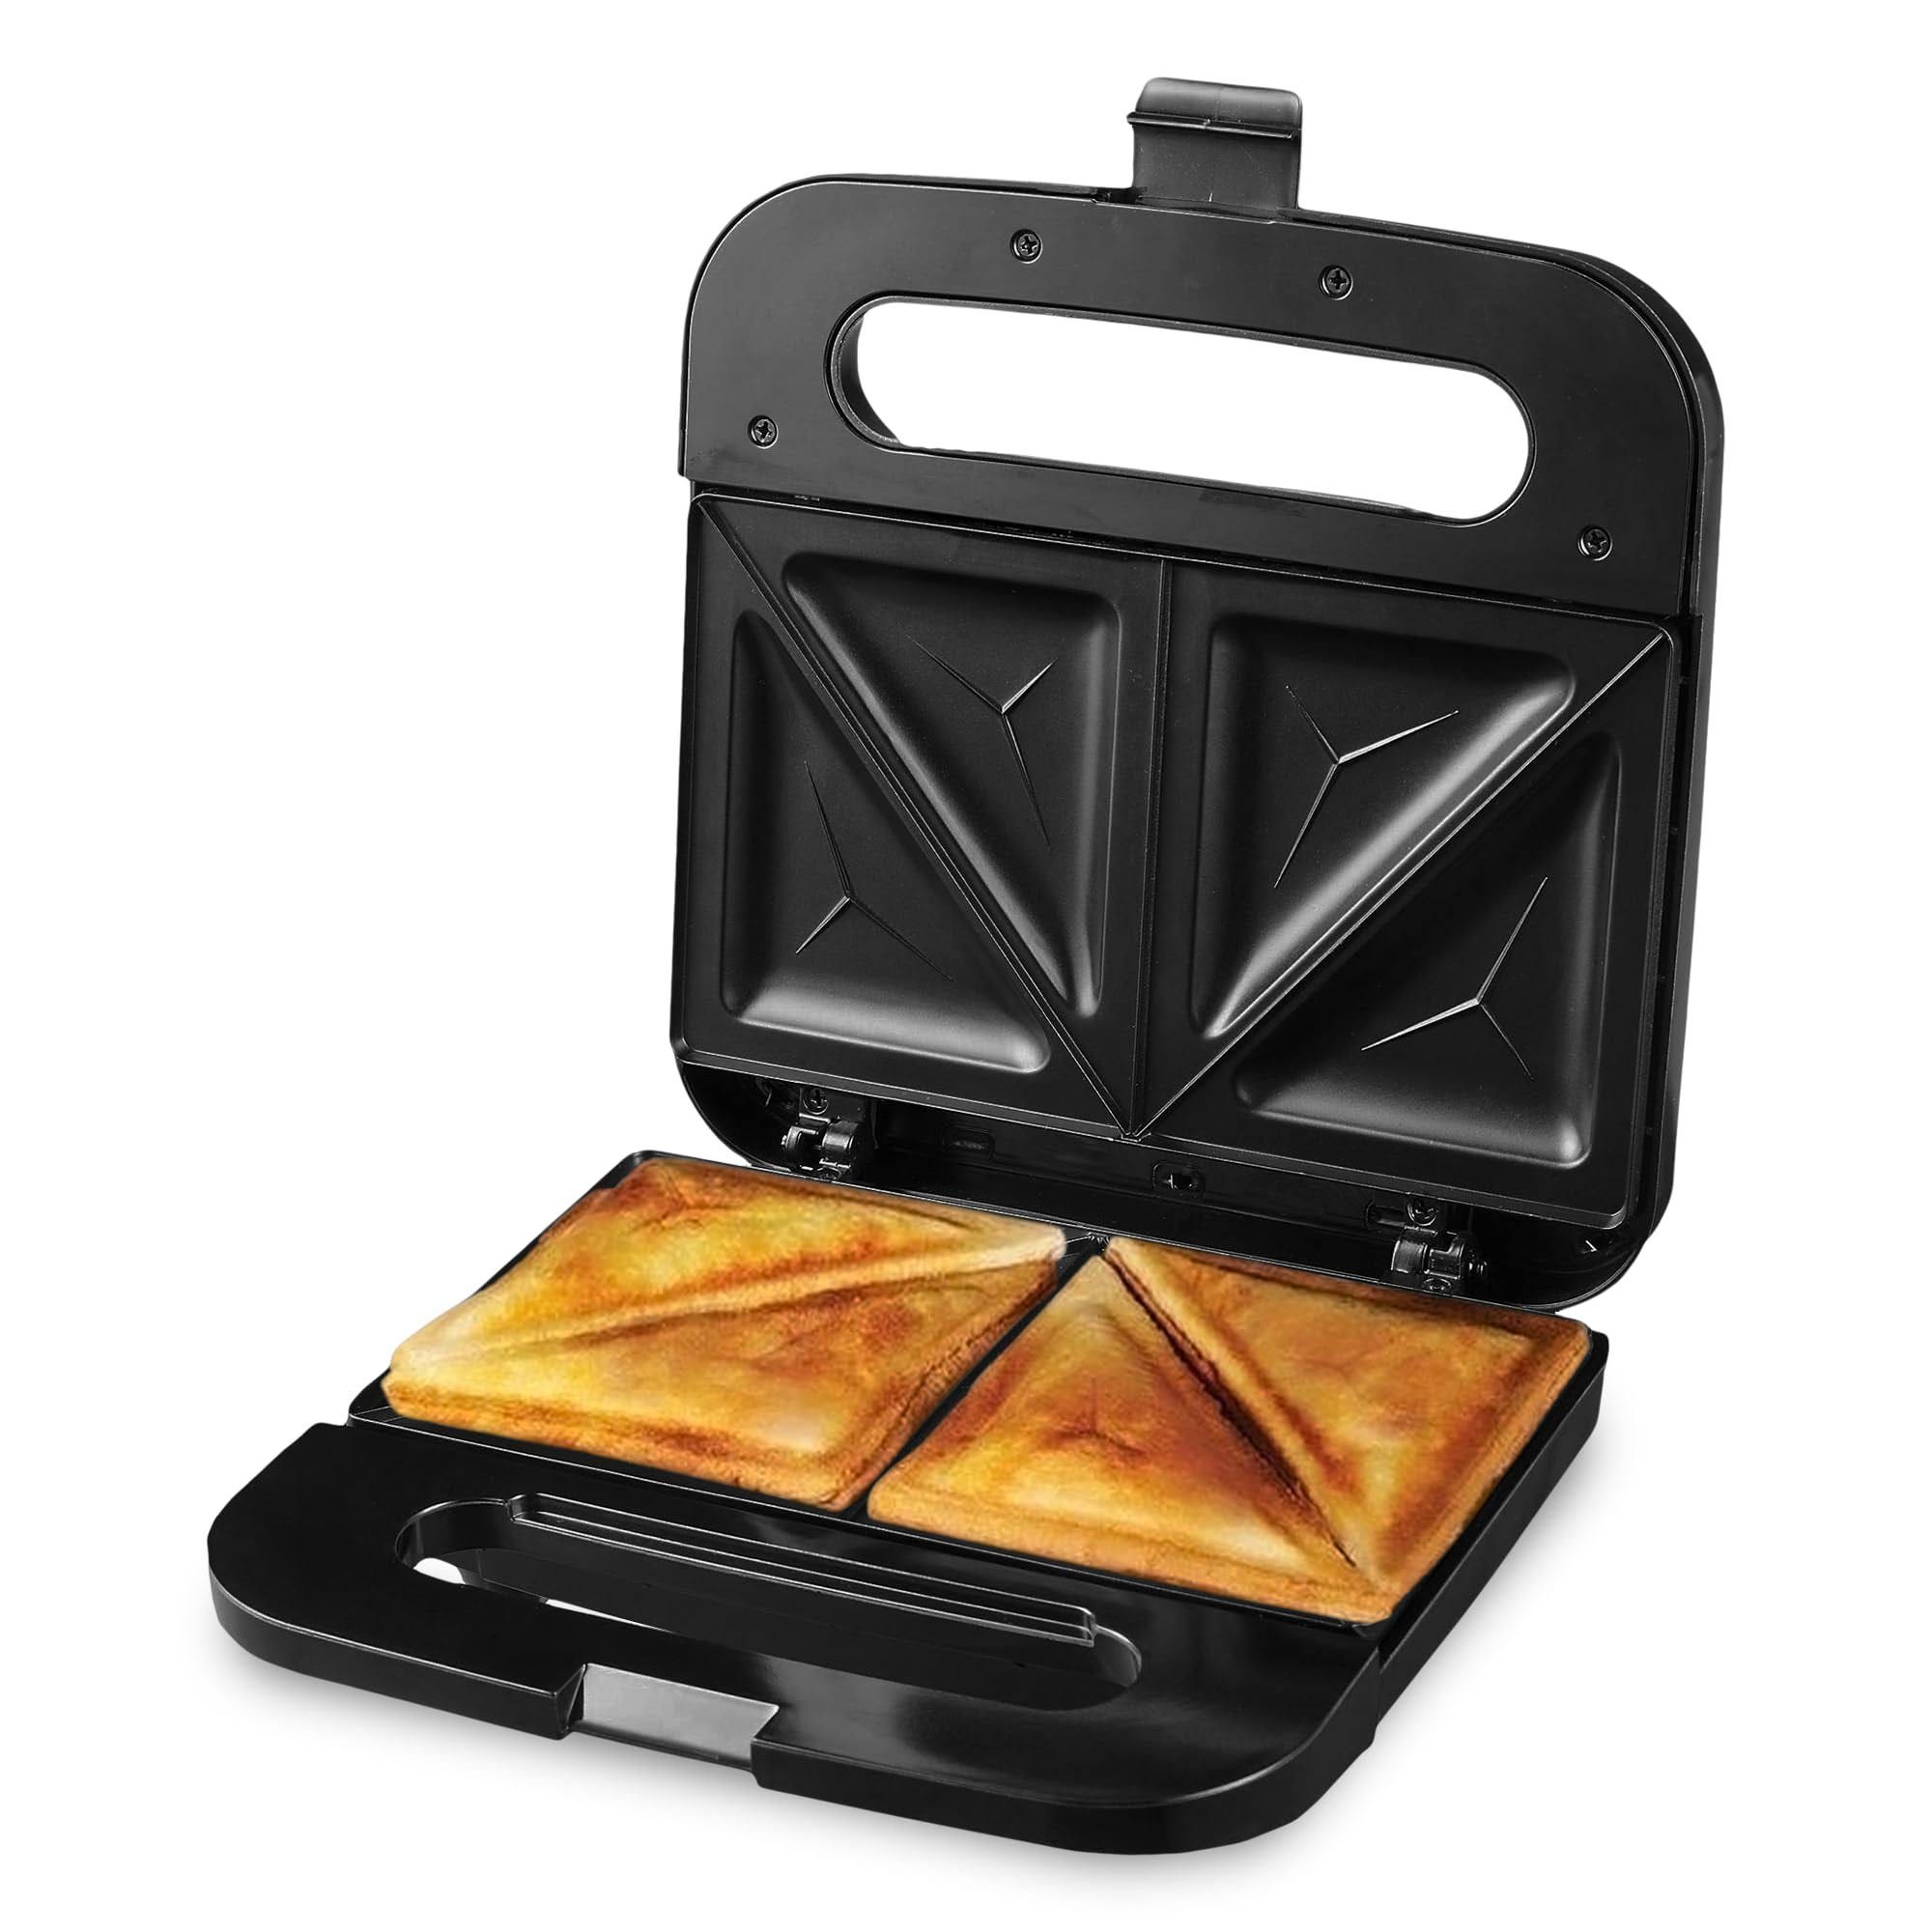 Ovente Non-Stick Electric Grill Sandwich Maker: Versatile and Easy to Clean | Image